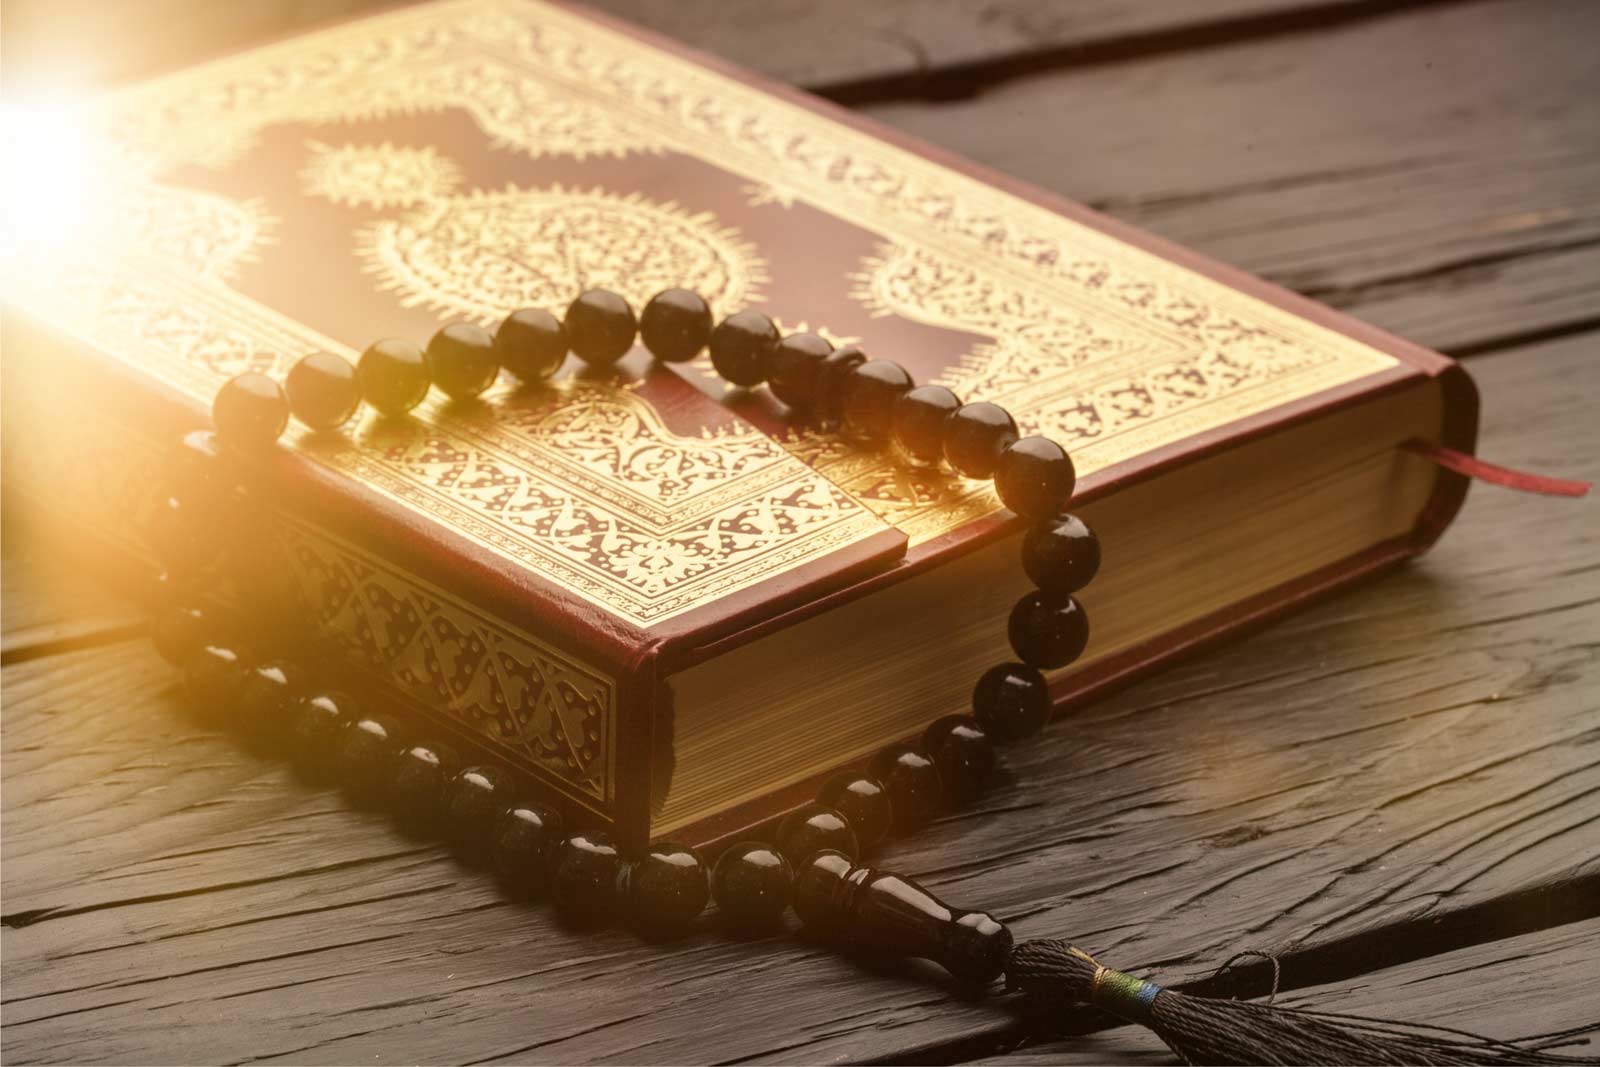 God Talks About the Great News in Quran